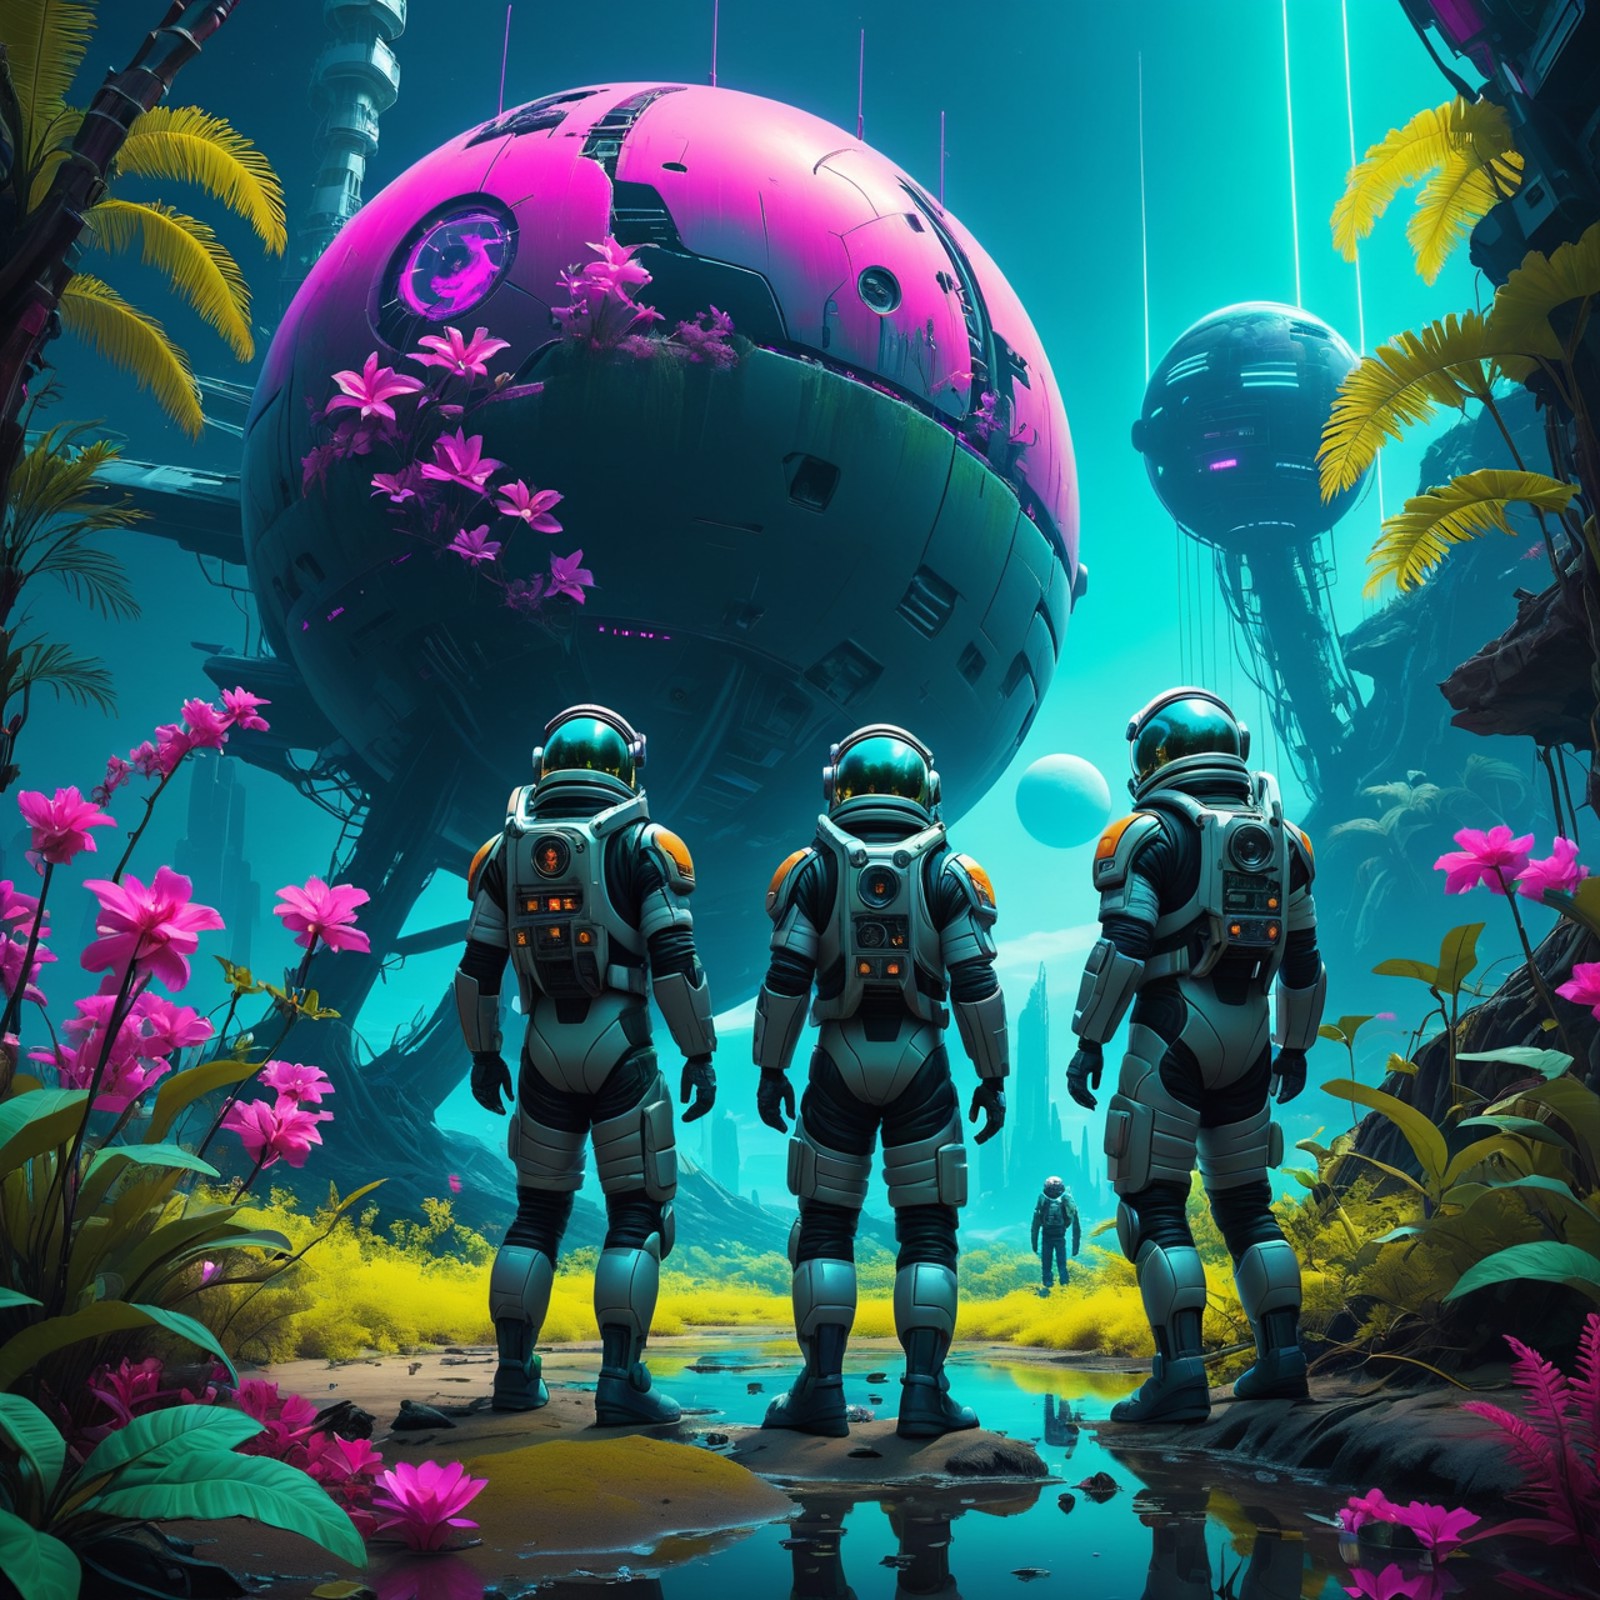 Shipwrecked astronauts on a planet where the flora and fauna mimic their fears., (futuristic Neon cyberpunk synthwave cybe...